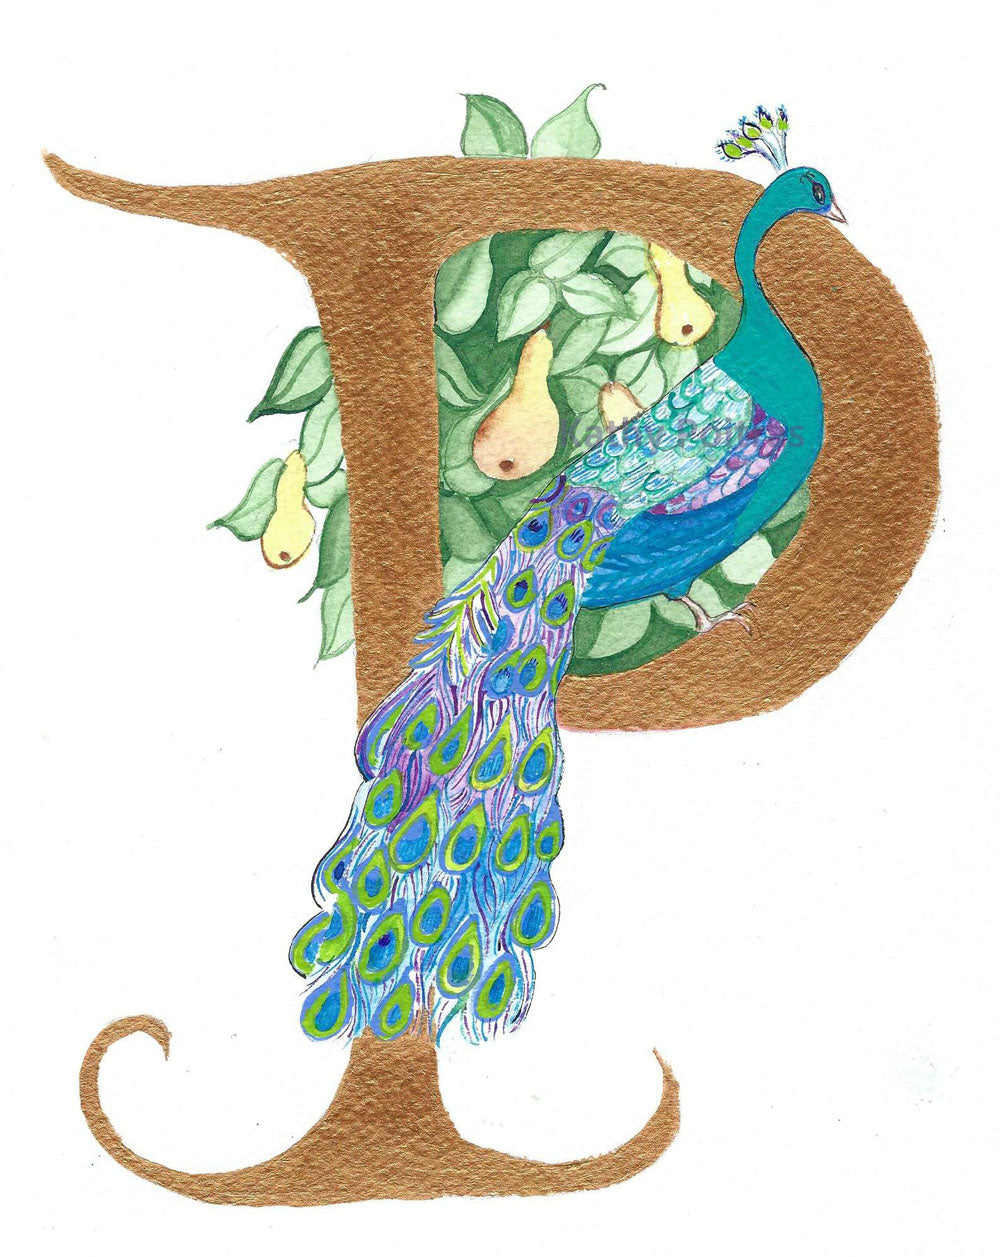 Illustrated Letter P for Peacock and Pear tree